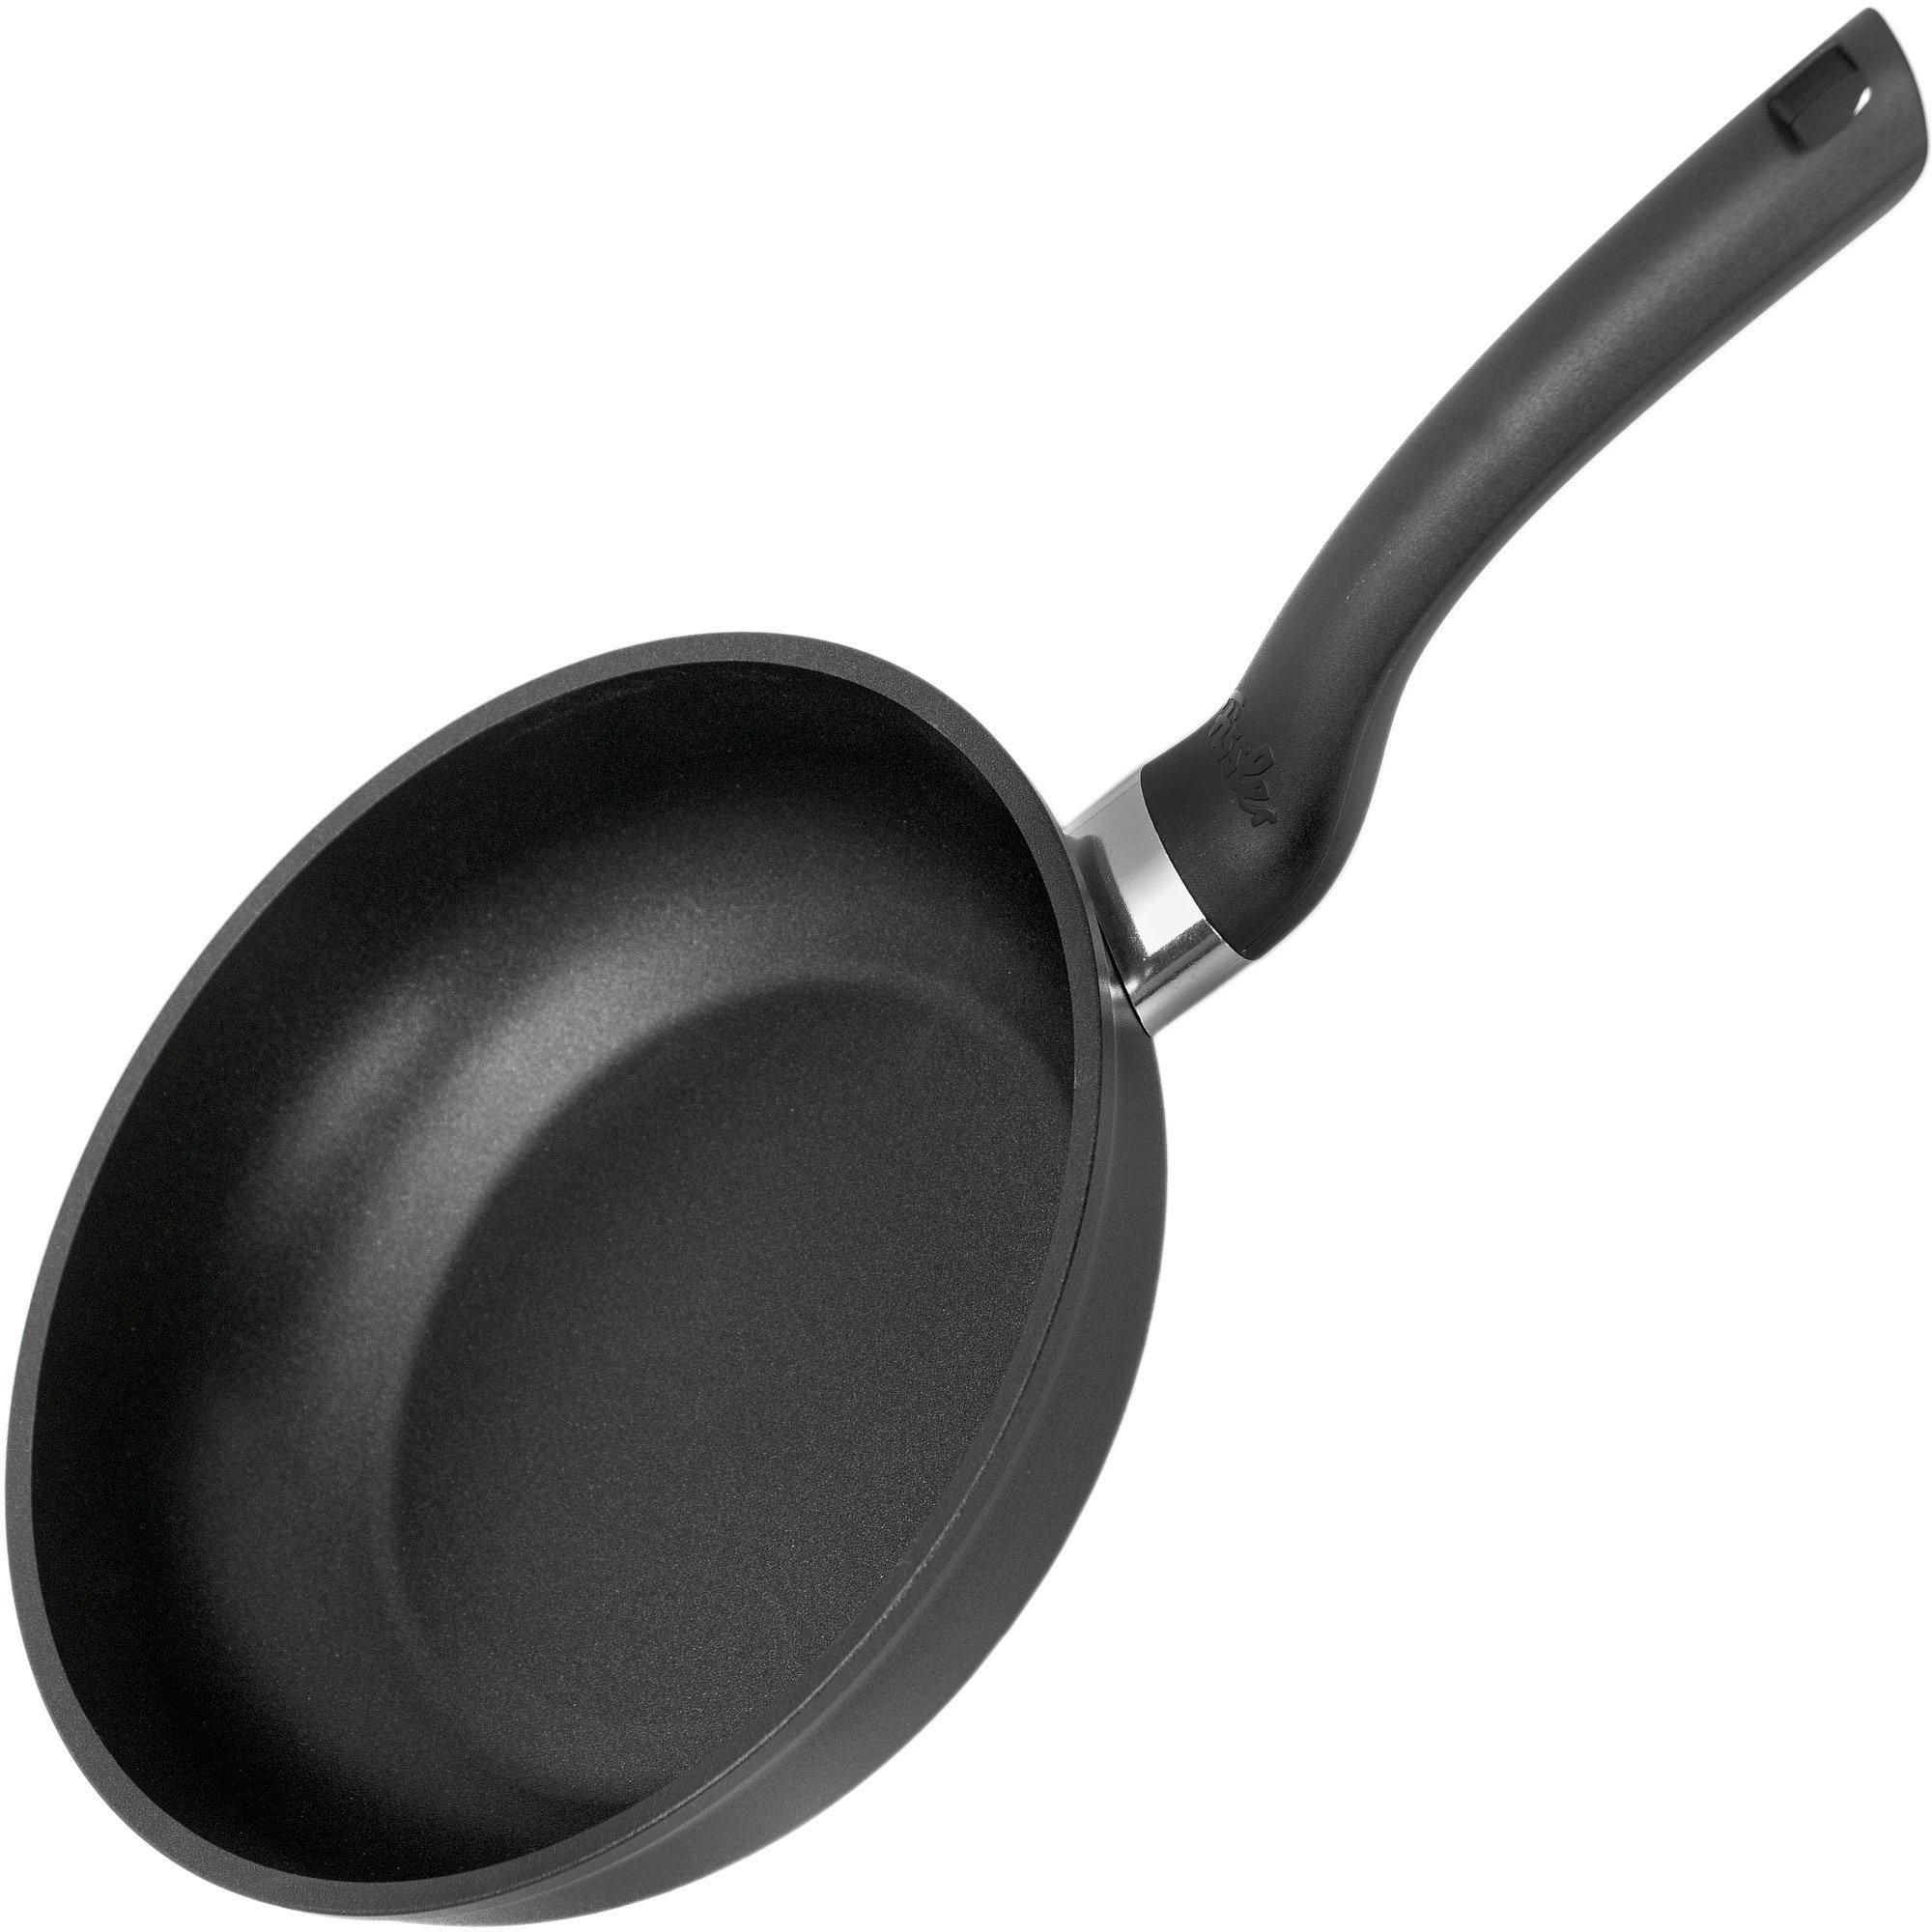 Fissler Cenit Induction 045-301-28-100, 28 at shopping cm frying | pan Advantageously